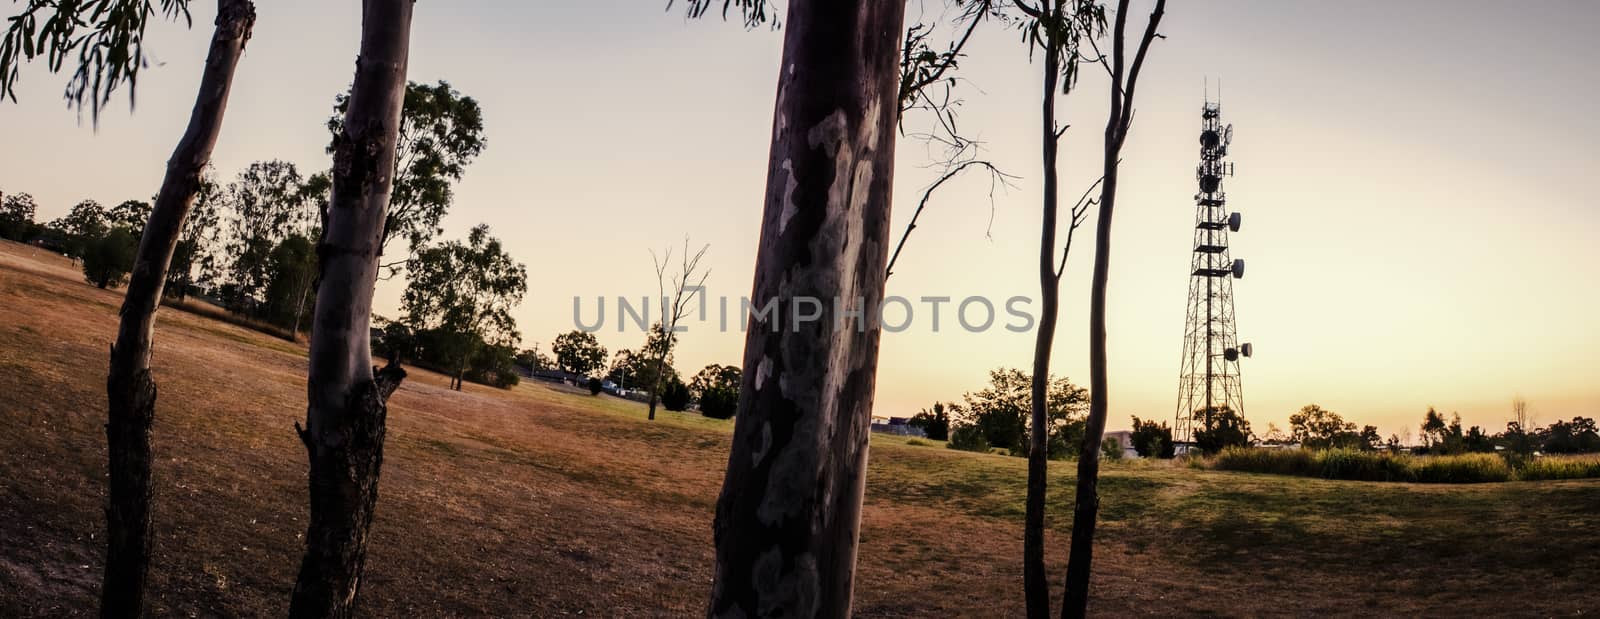 Large radio and communications tower in Queensland. by artistrobd